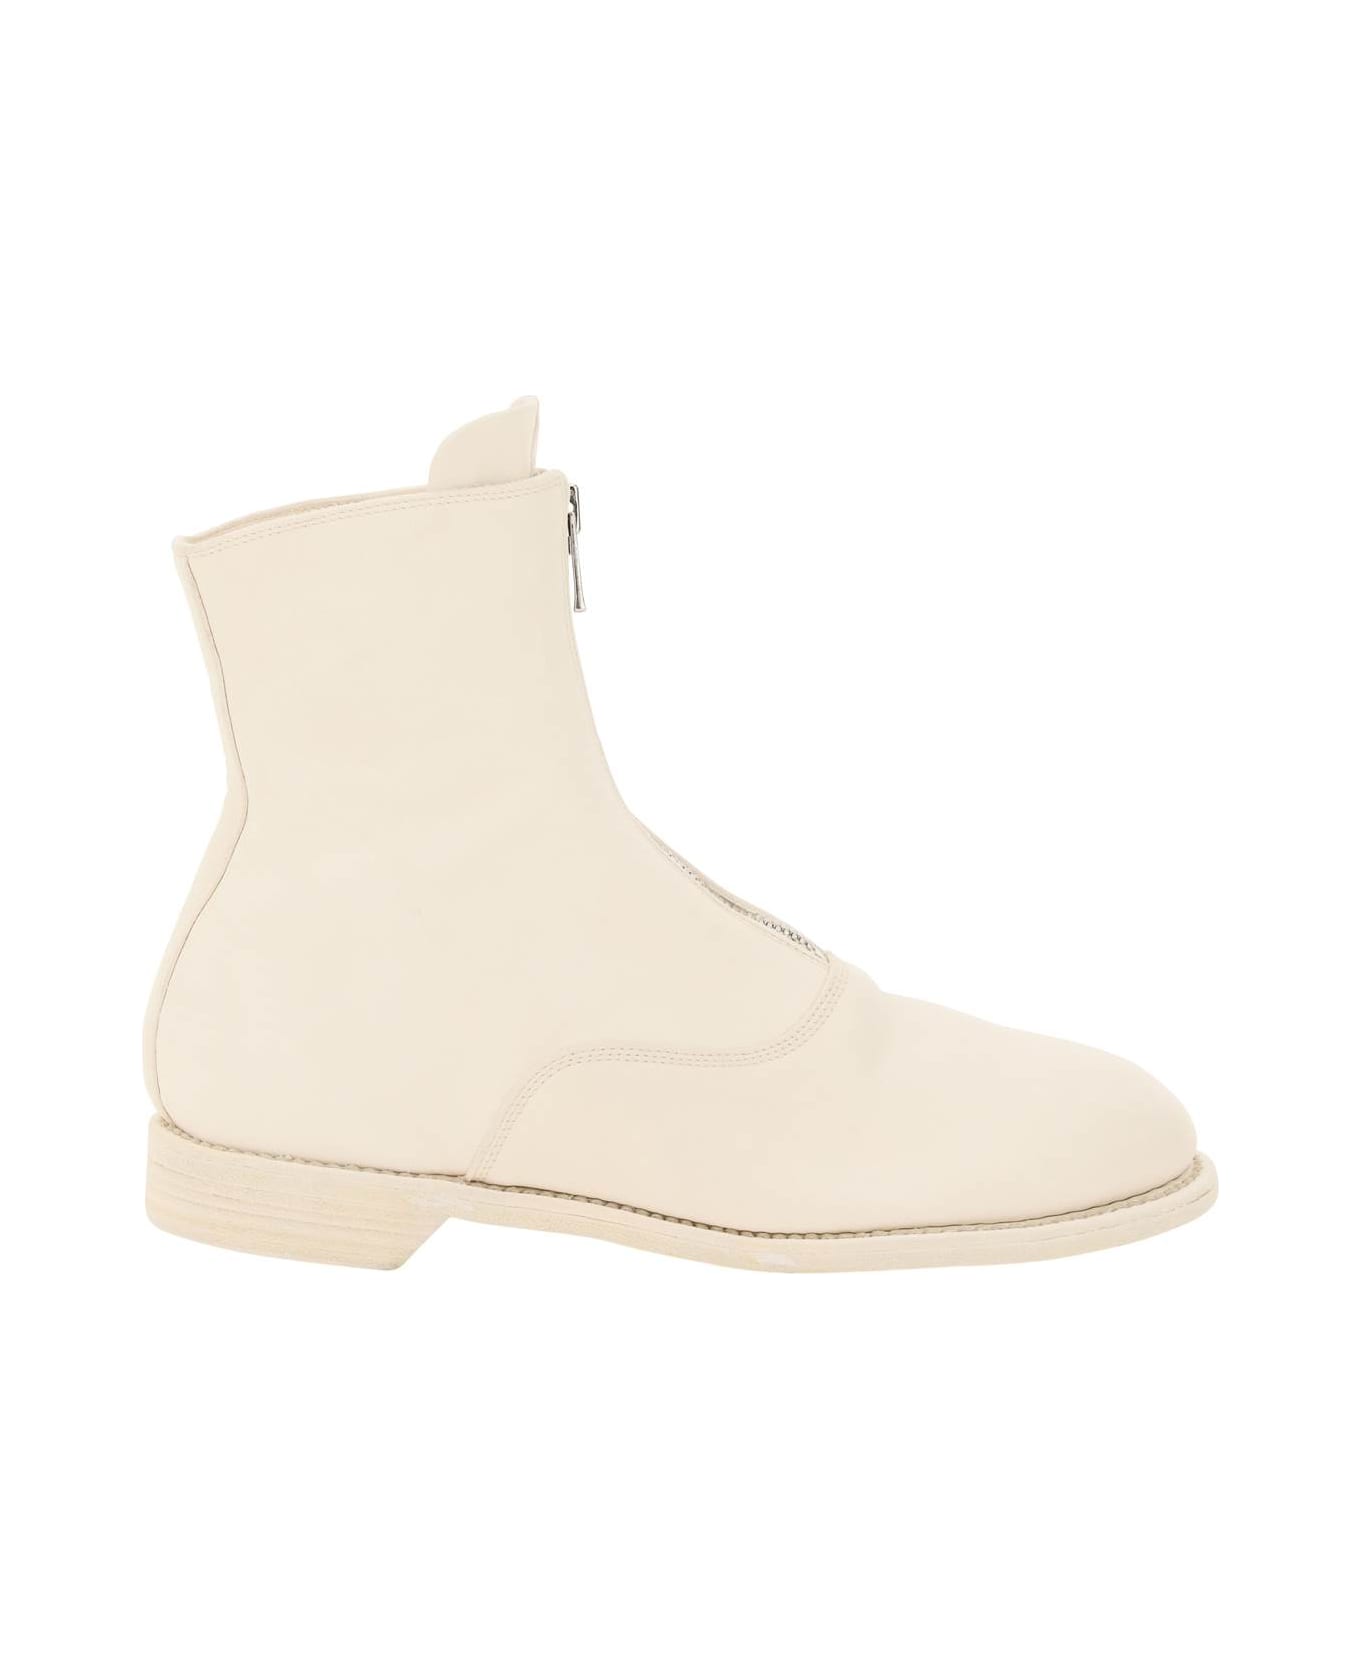 Guidi Front Zip Leather Ankle Boots - WHITE (White)